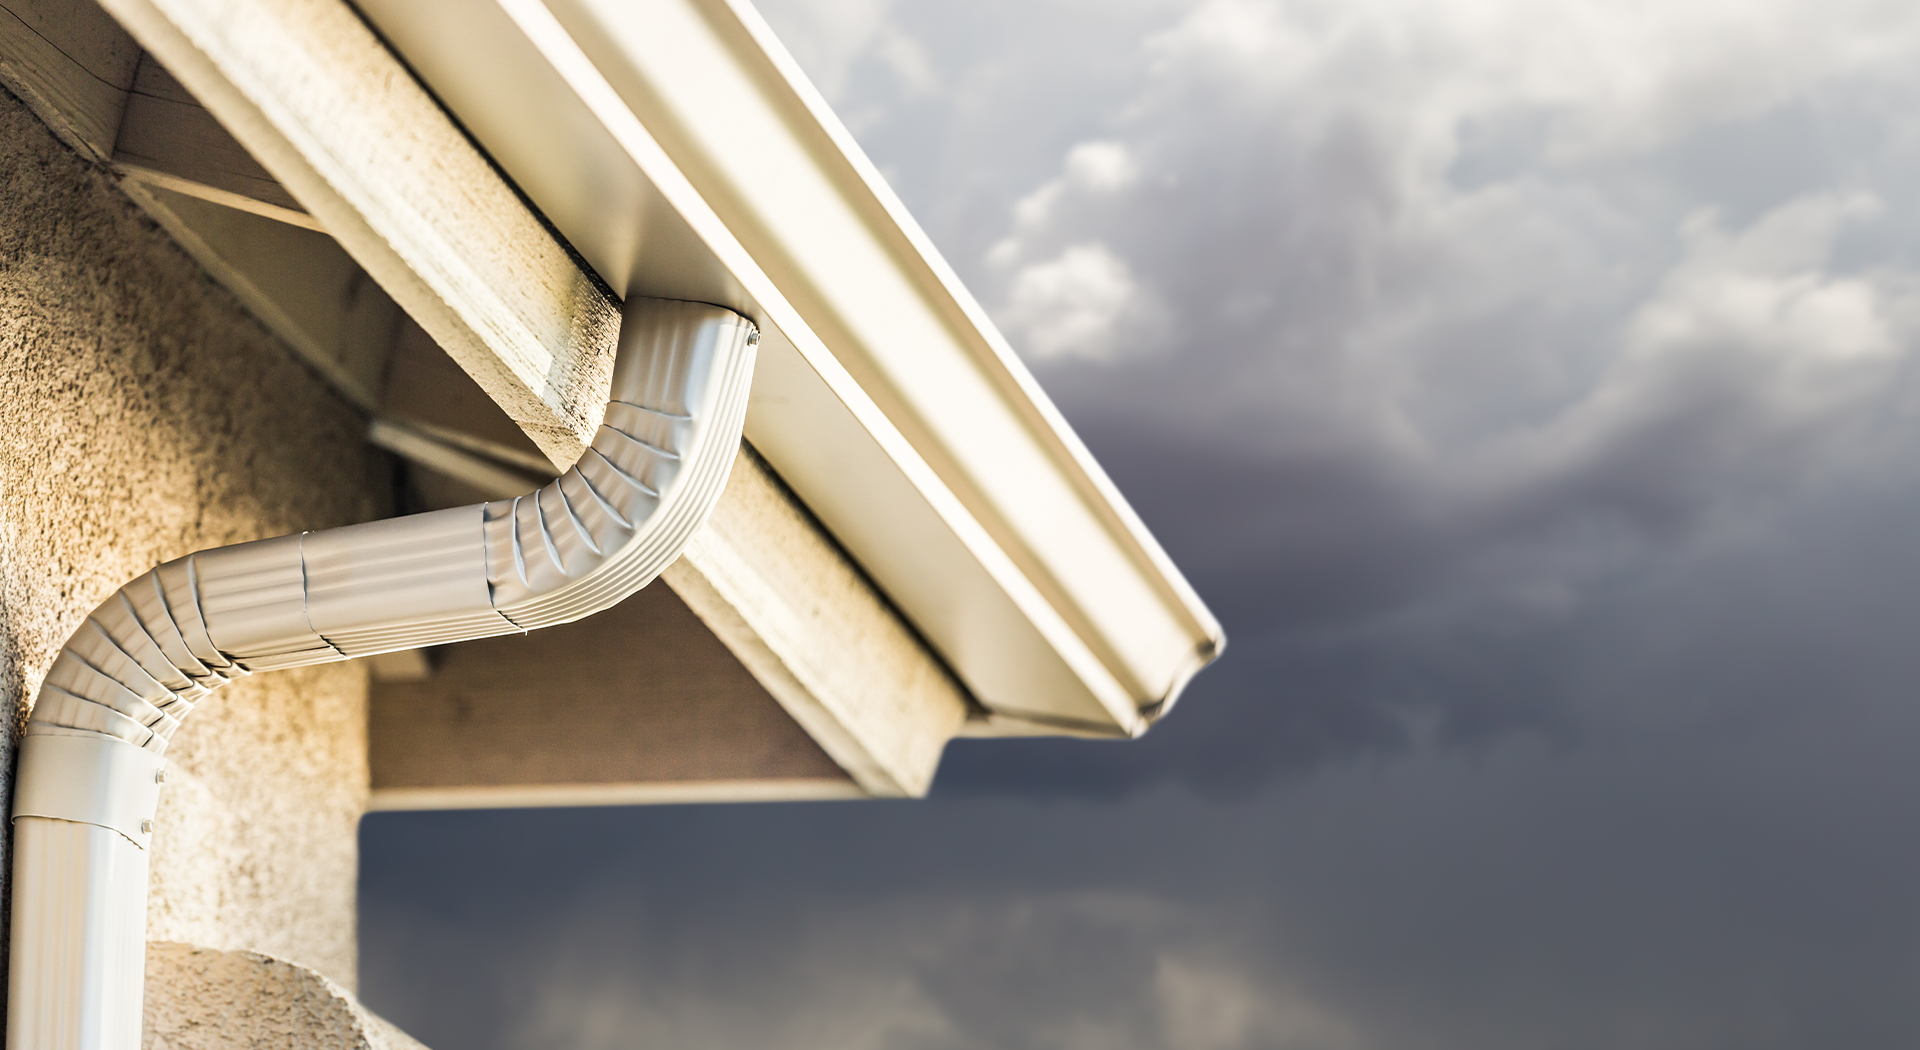 What are the common problems associated with gutter guards?